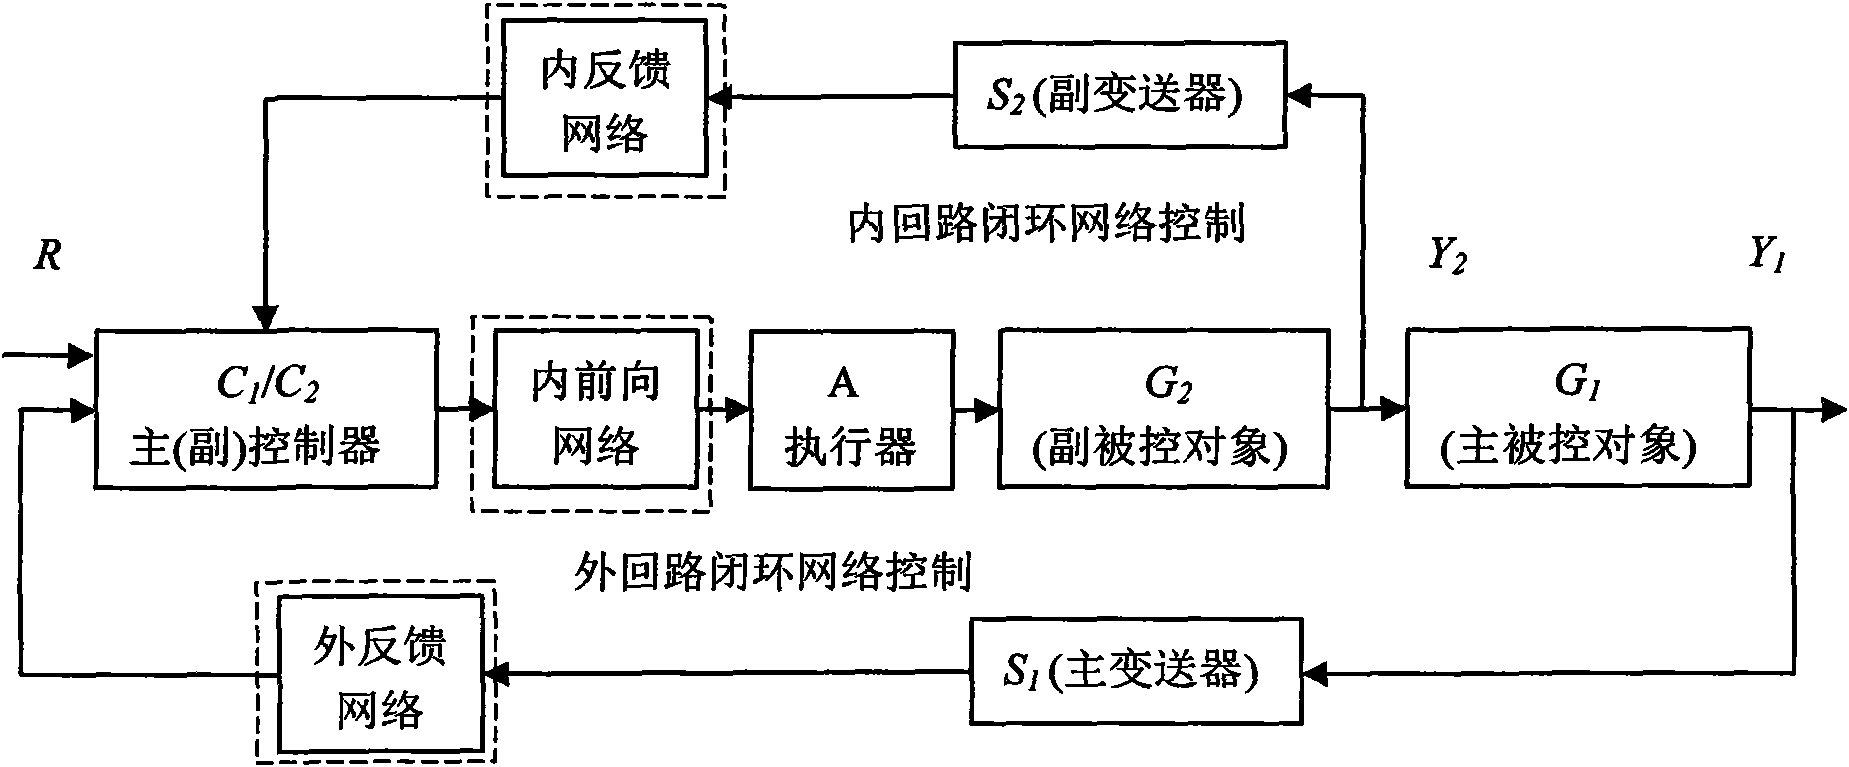 External feedback and inner loop nondeterministic network time delay compensation method of network cascade control system